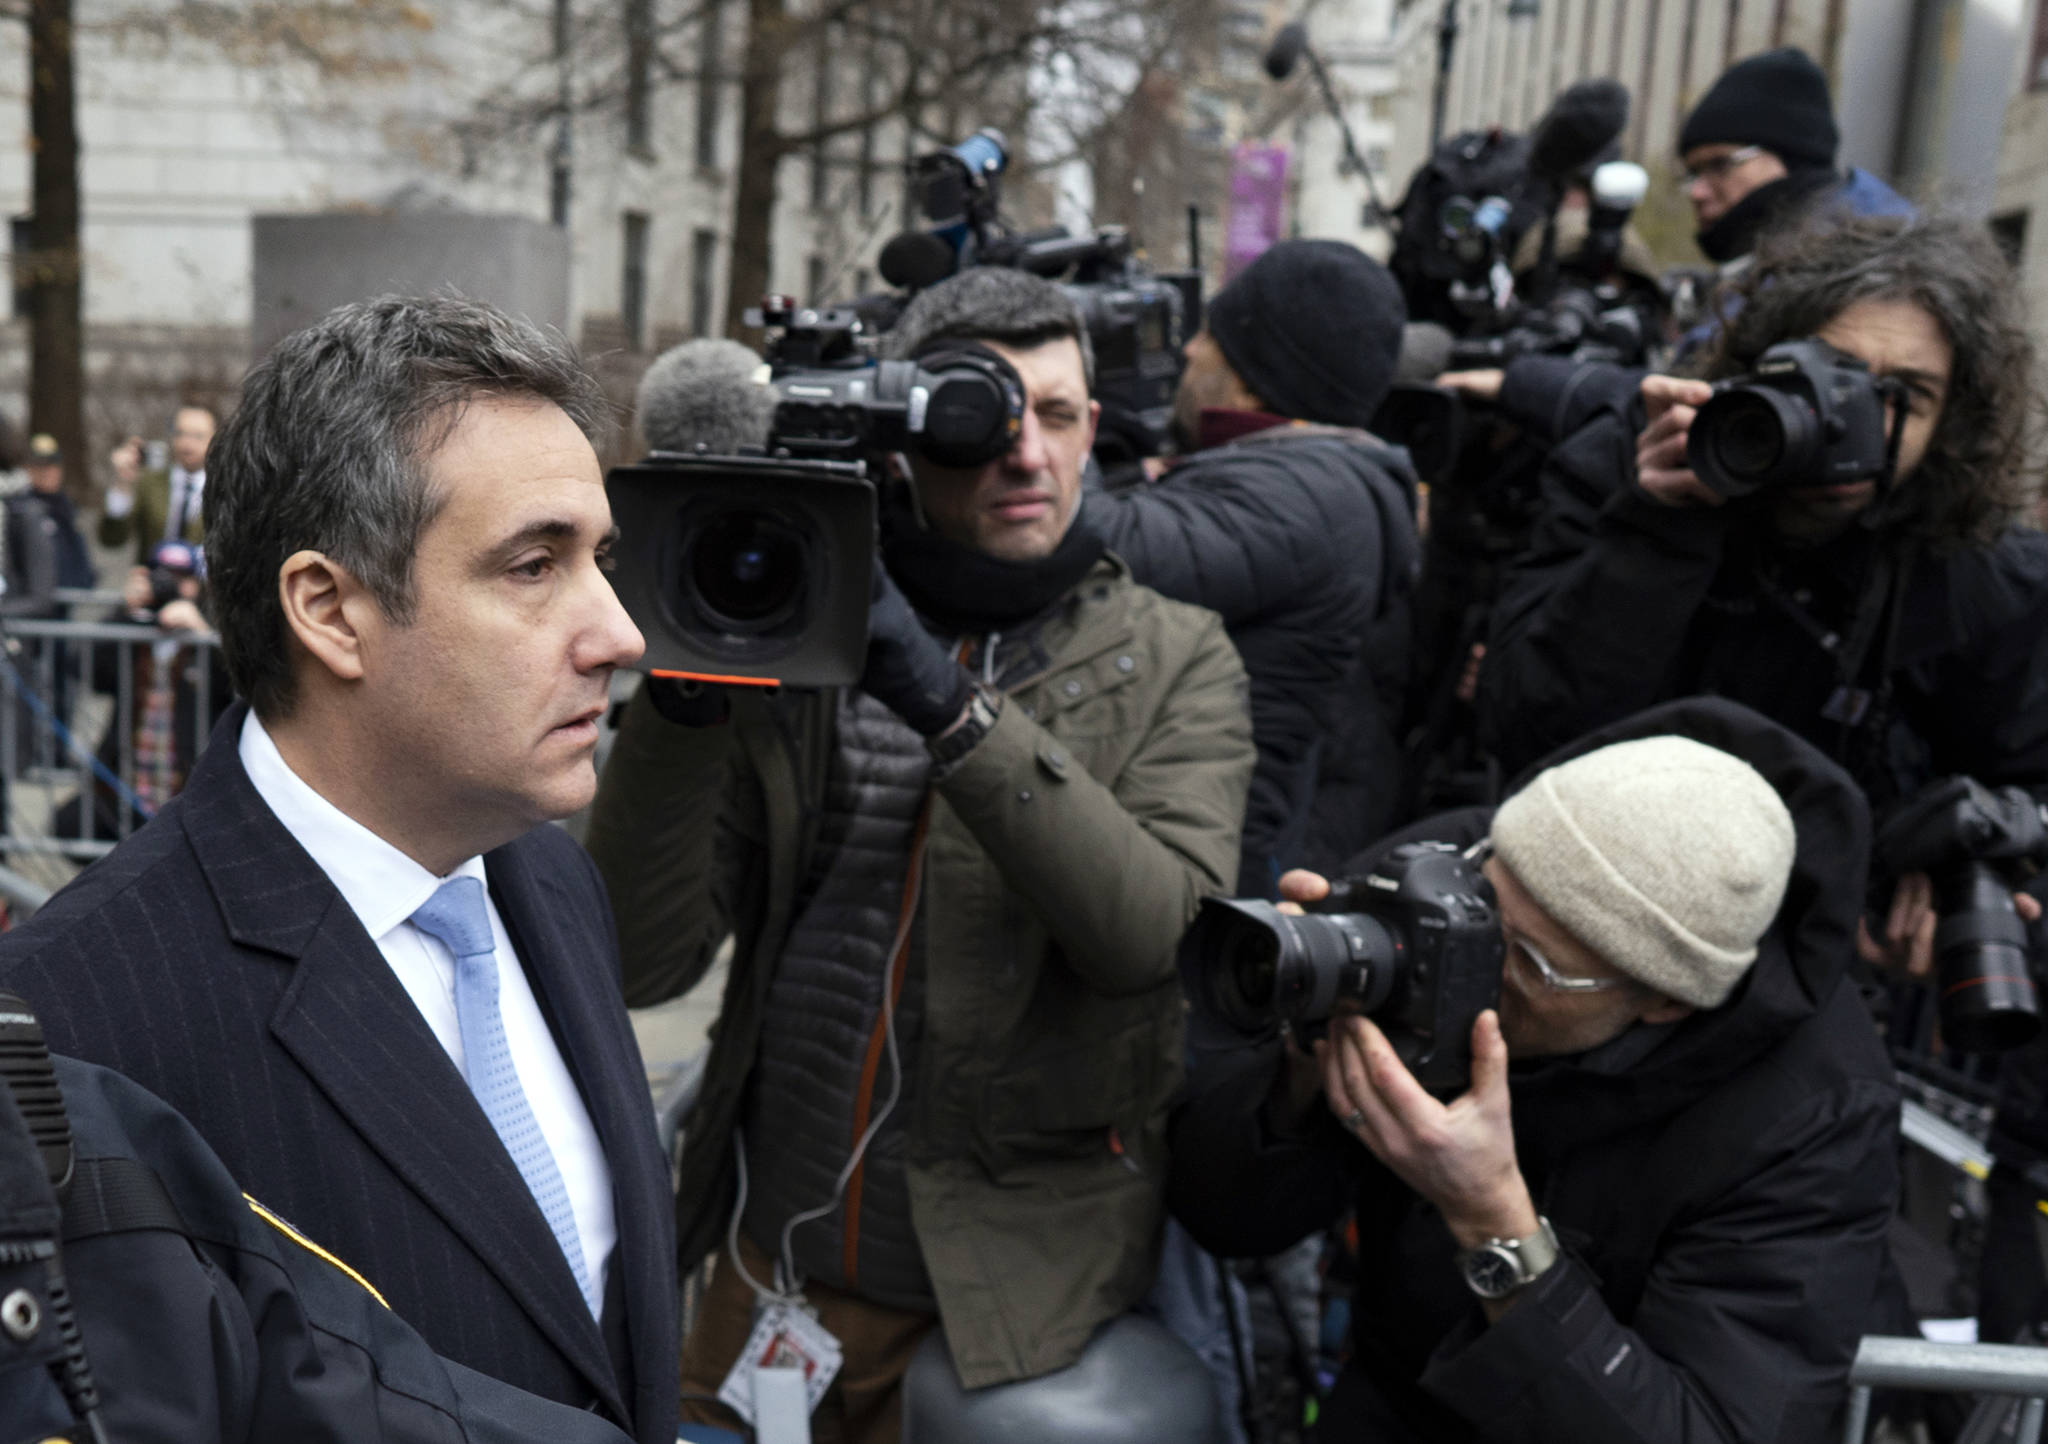 Michael Cohen, left, President Donald Trump’s former lawyer, leaves federal court after his sentencing in New York, Wednesday, Dec. 12, 2018. Cohen was sentenced Wednesday to three years in prison for an array of crimes that included arranging the payment of hush money to two women that he says was done at the direction of Trump. (AP Photo/Craig Ruttle)